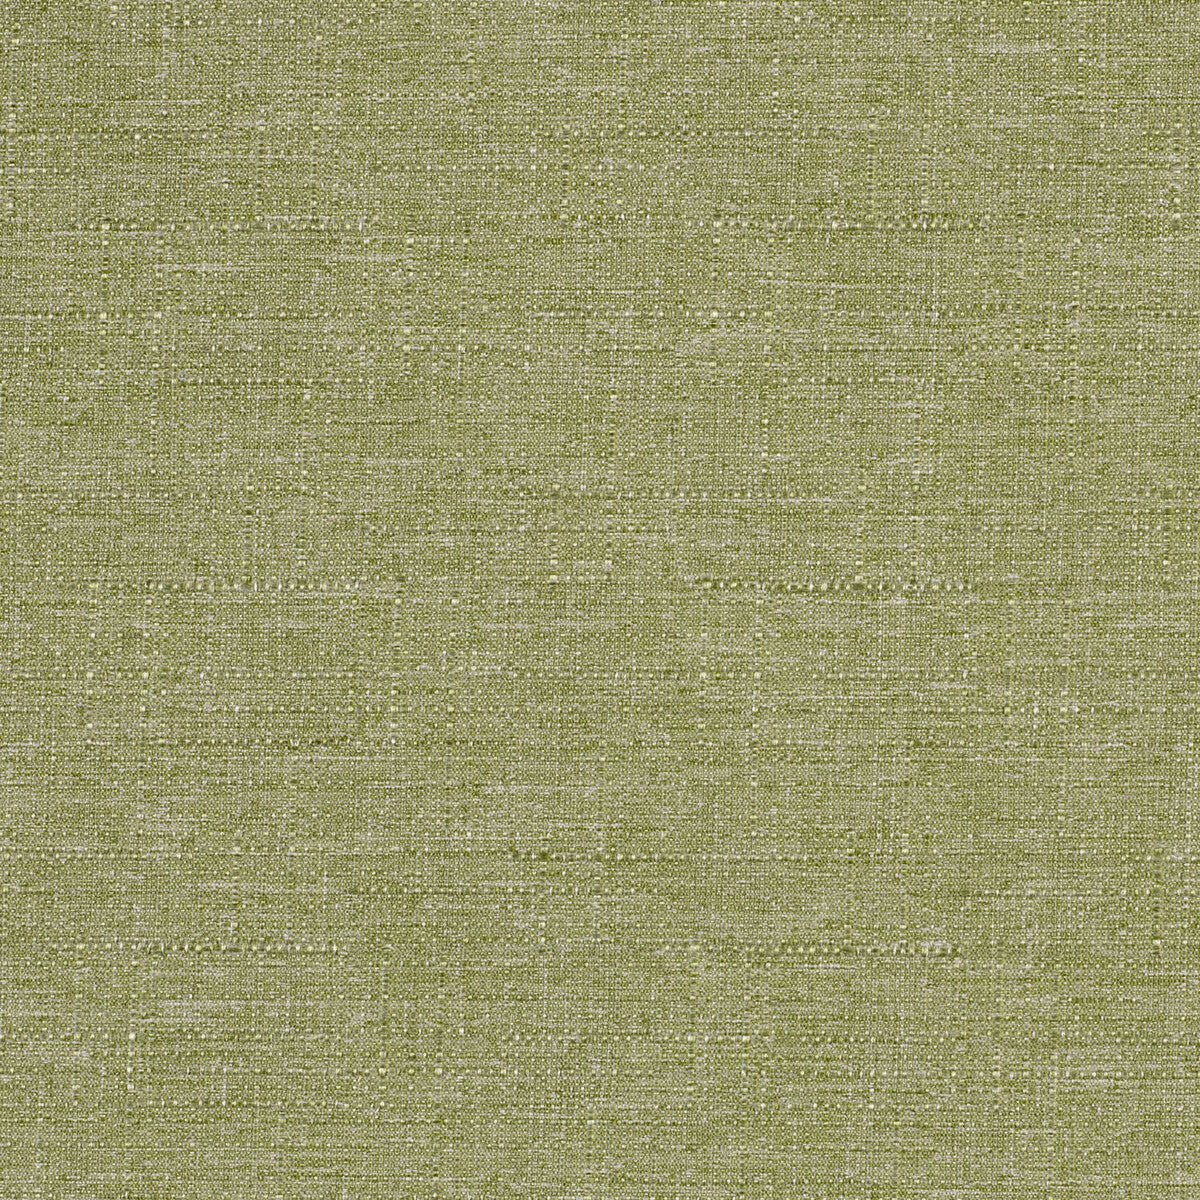 Kravet Contract fabric in 4321-30 color - pattern 4321.30.0 - by Kravet Contract